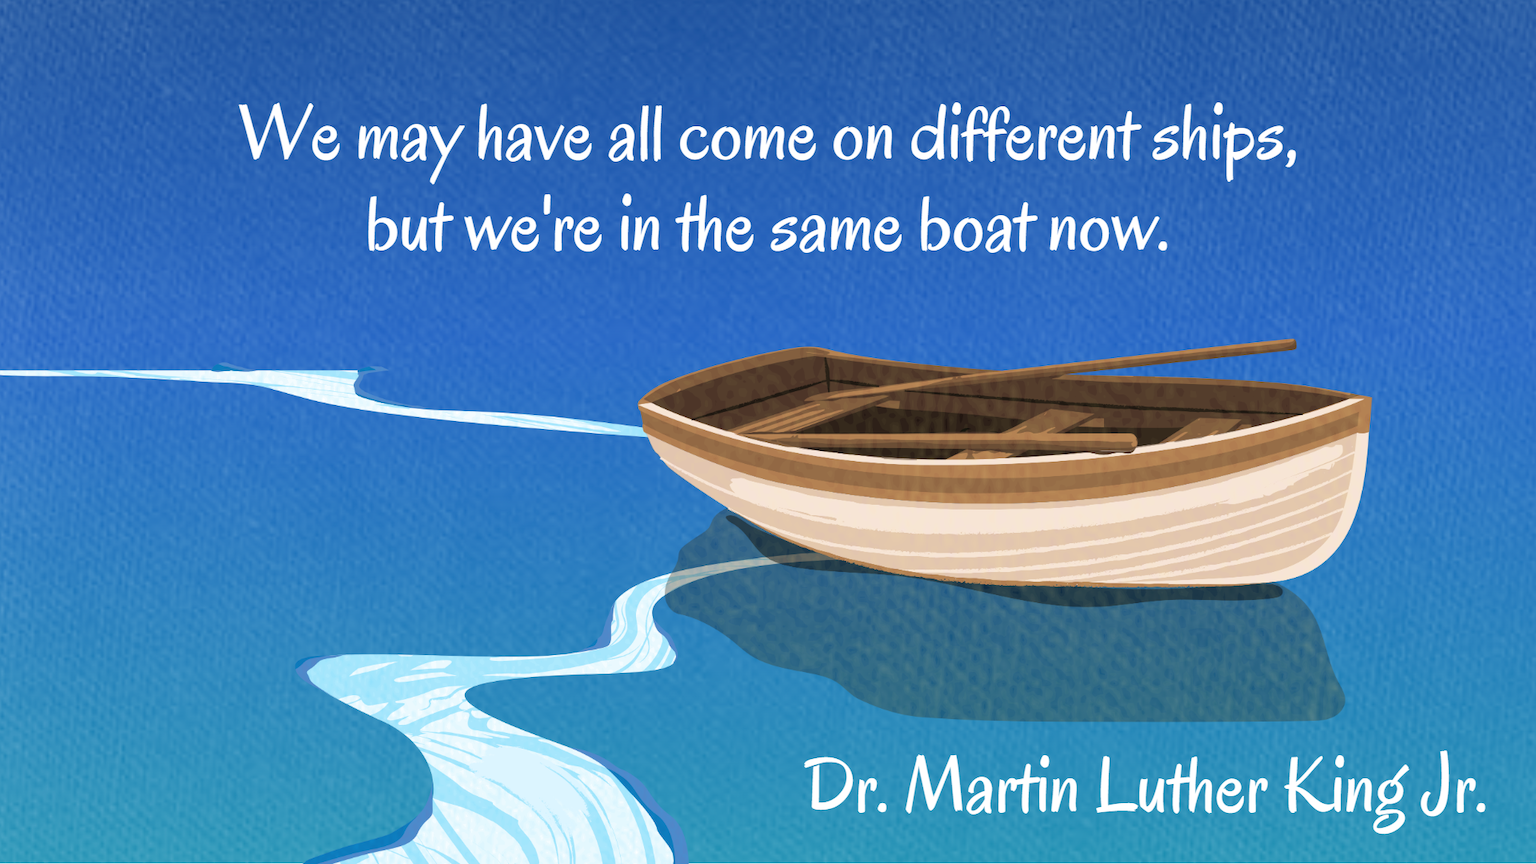 Contest submission titled "Together." The image of a rowboat floating on water overlaid with text that says "We may have all come on different ships, but we're in the same boat now. Dr. Martin Luther King Jr."